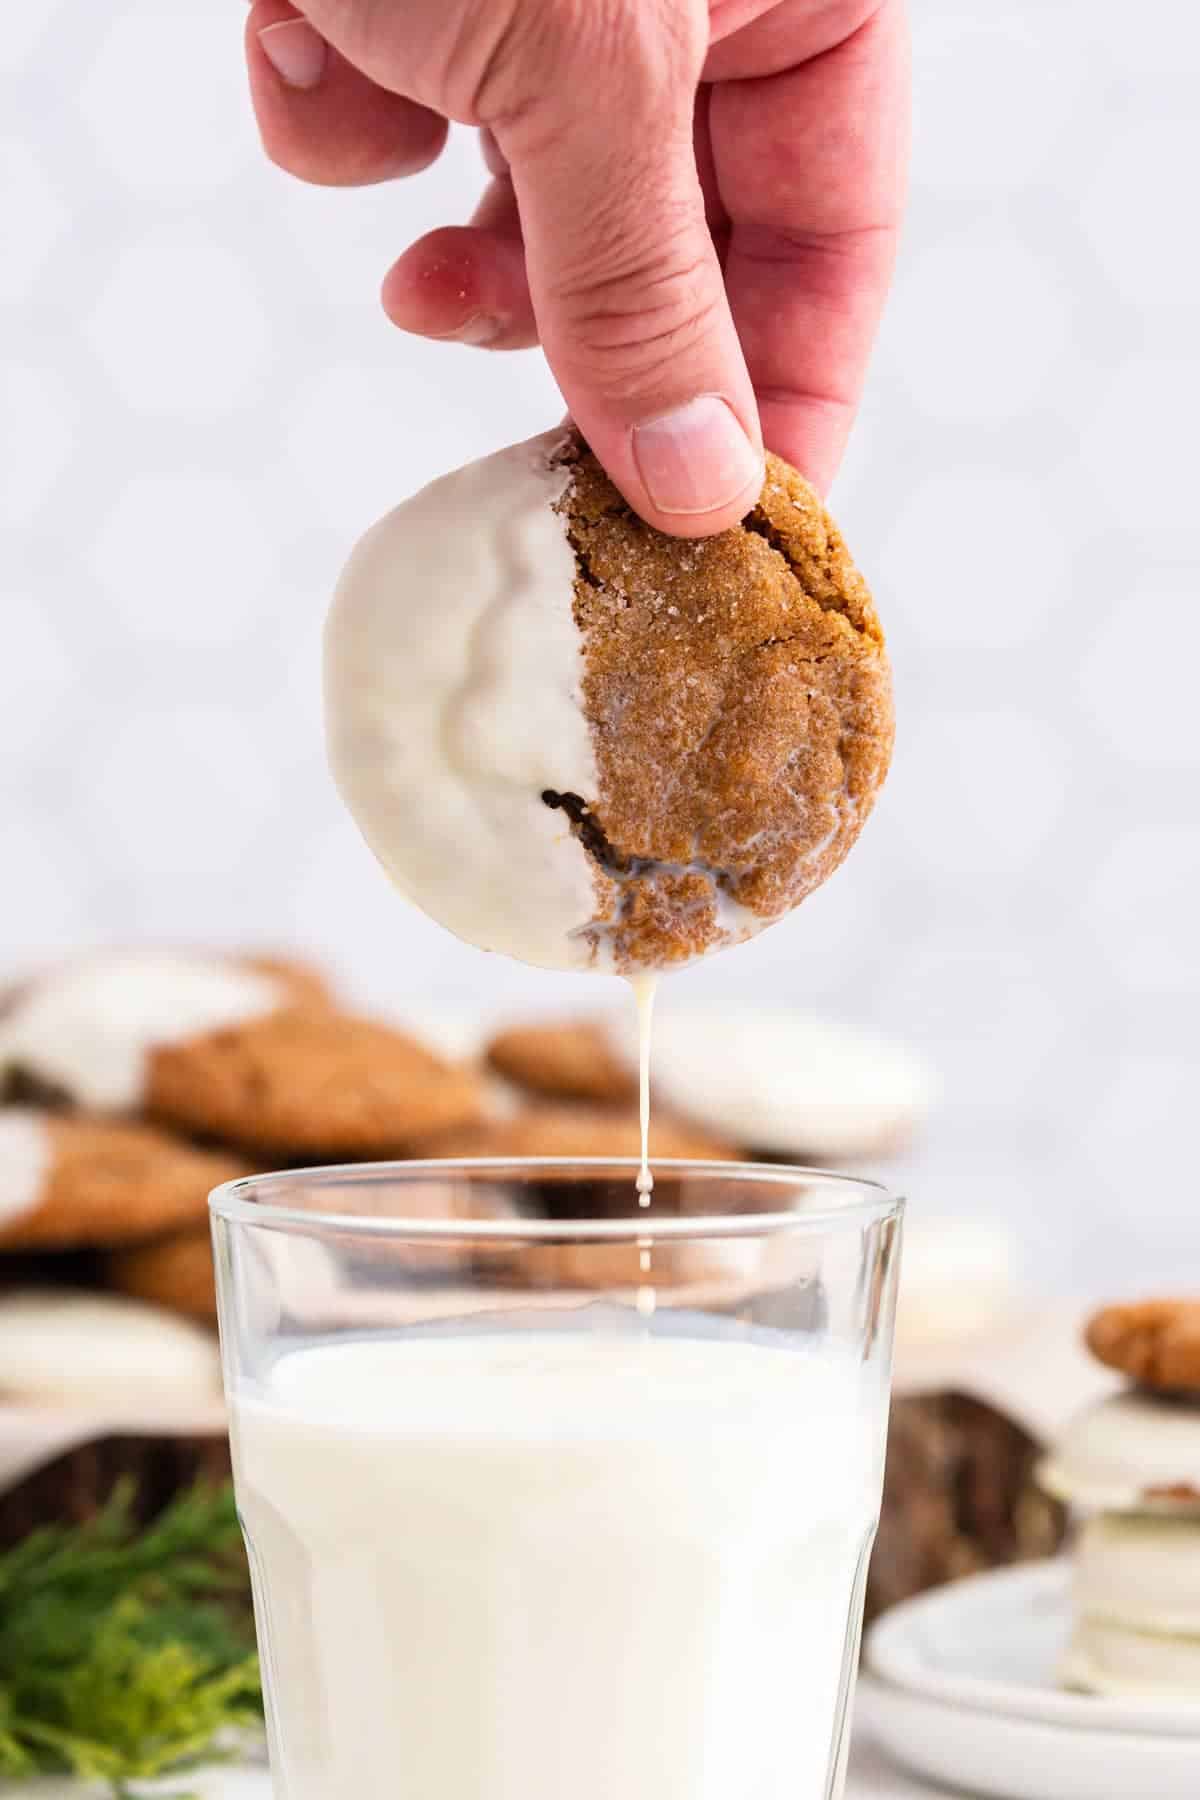 A cookie being dunked in a glass of milk